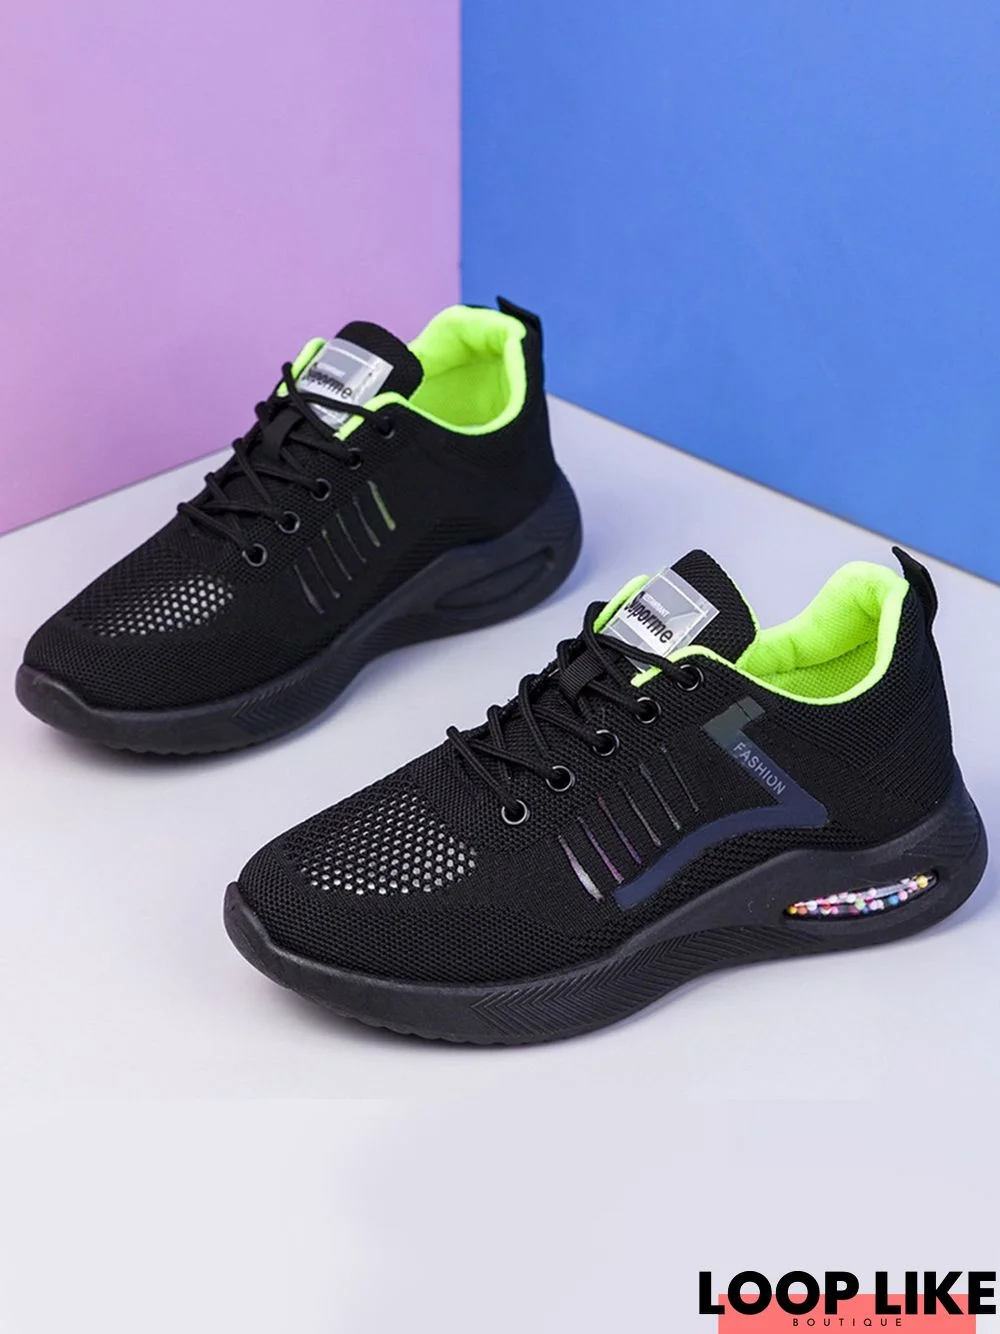 Lightweight Breathable Mesh Fabric Lace-Up Sneakers